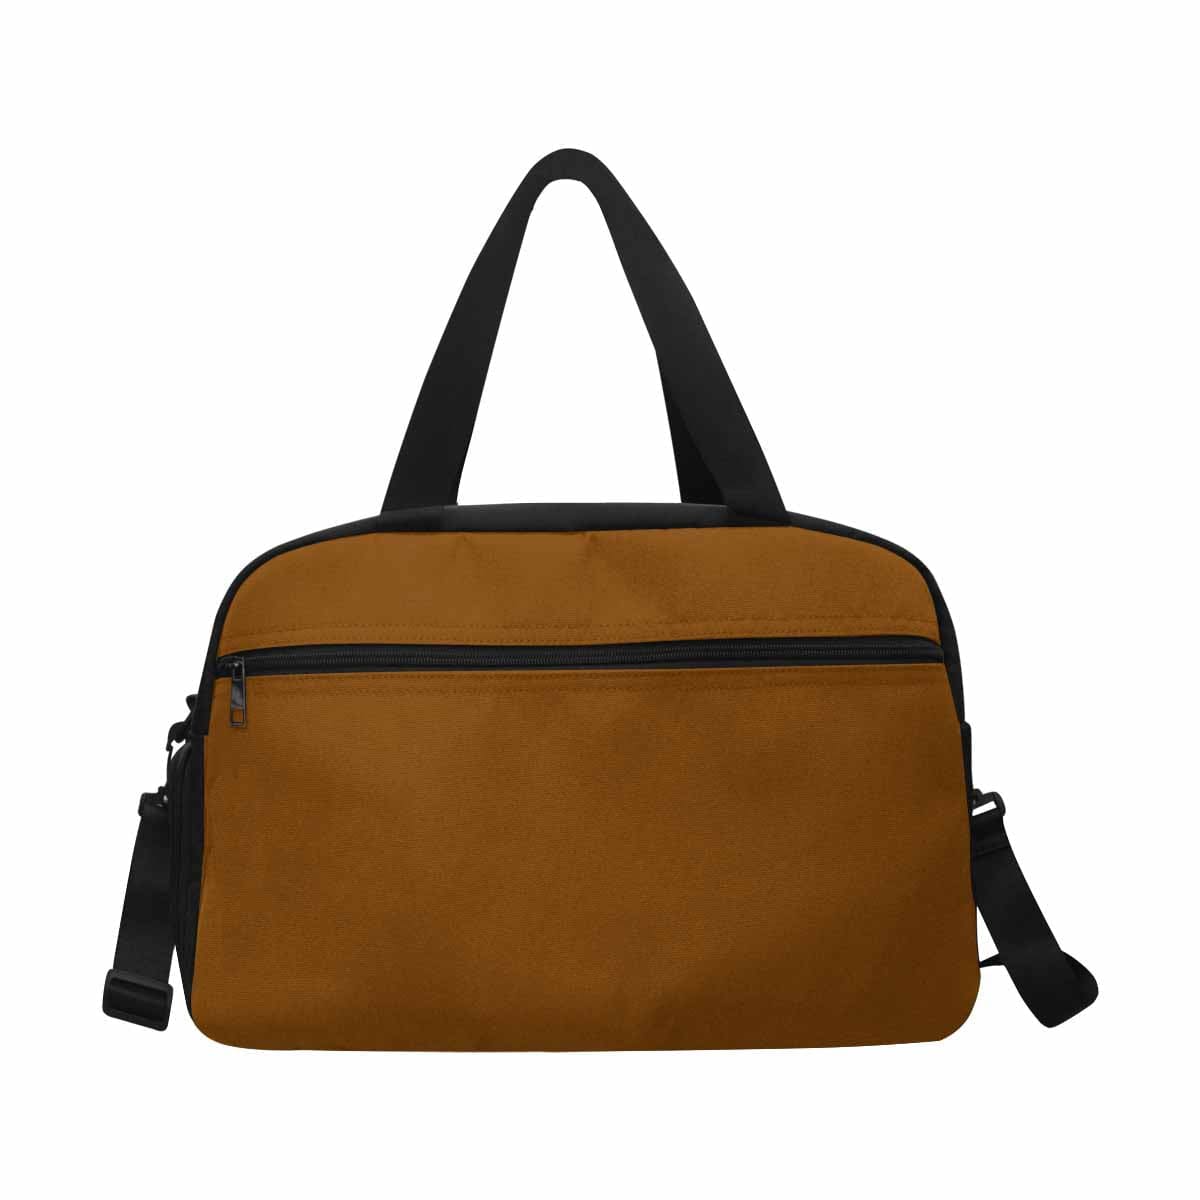 Chocolate Brown Tote And Crossbody Travel Bag - Bags | Travel Bags | Crossbody